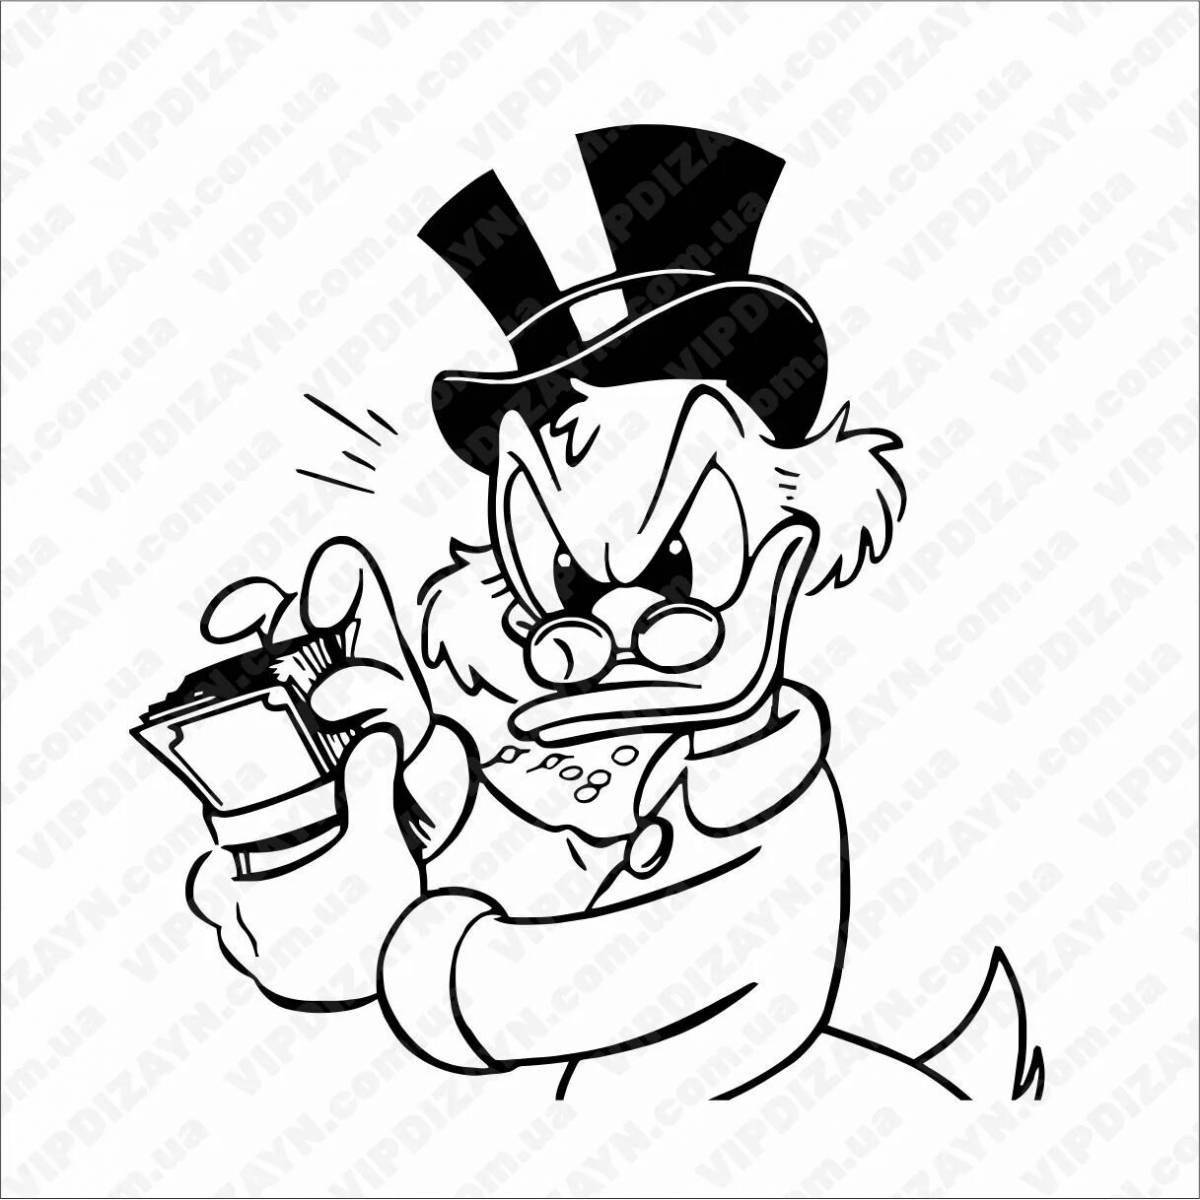 Coloring page luxury scrooge mcduck with money